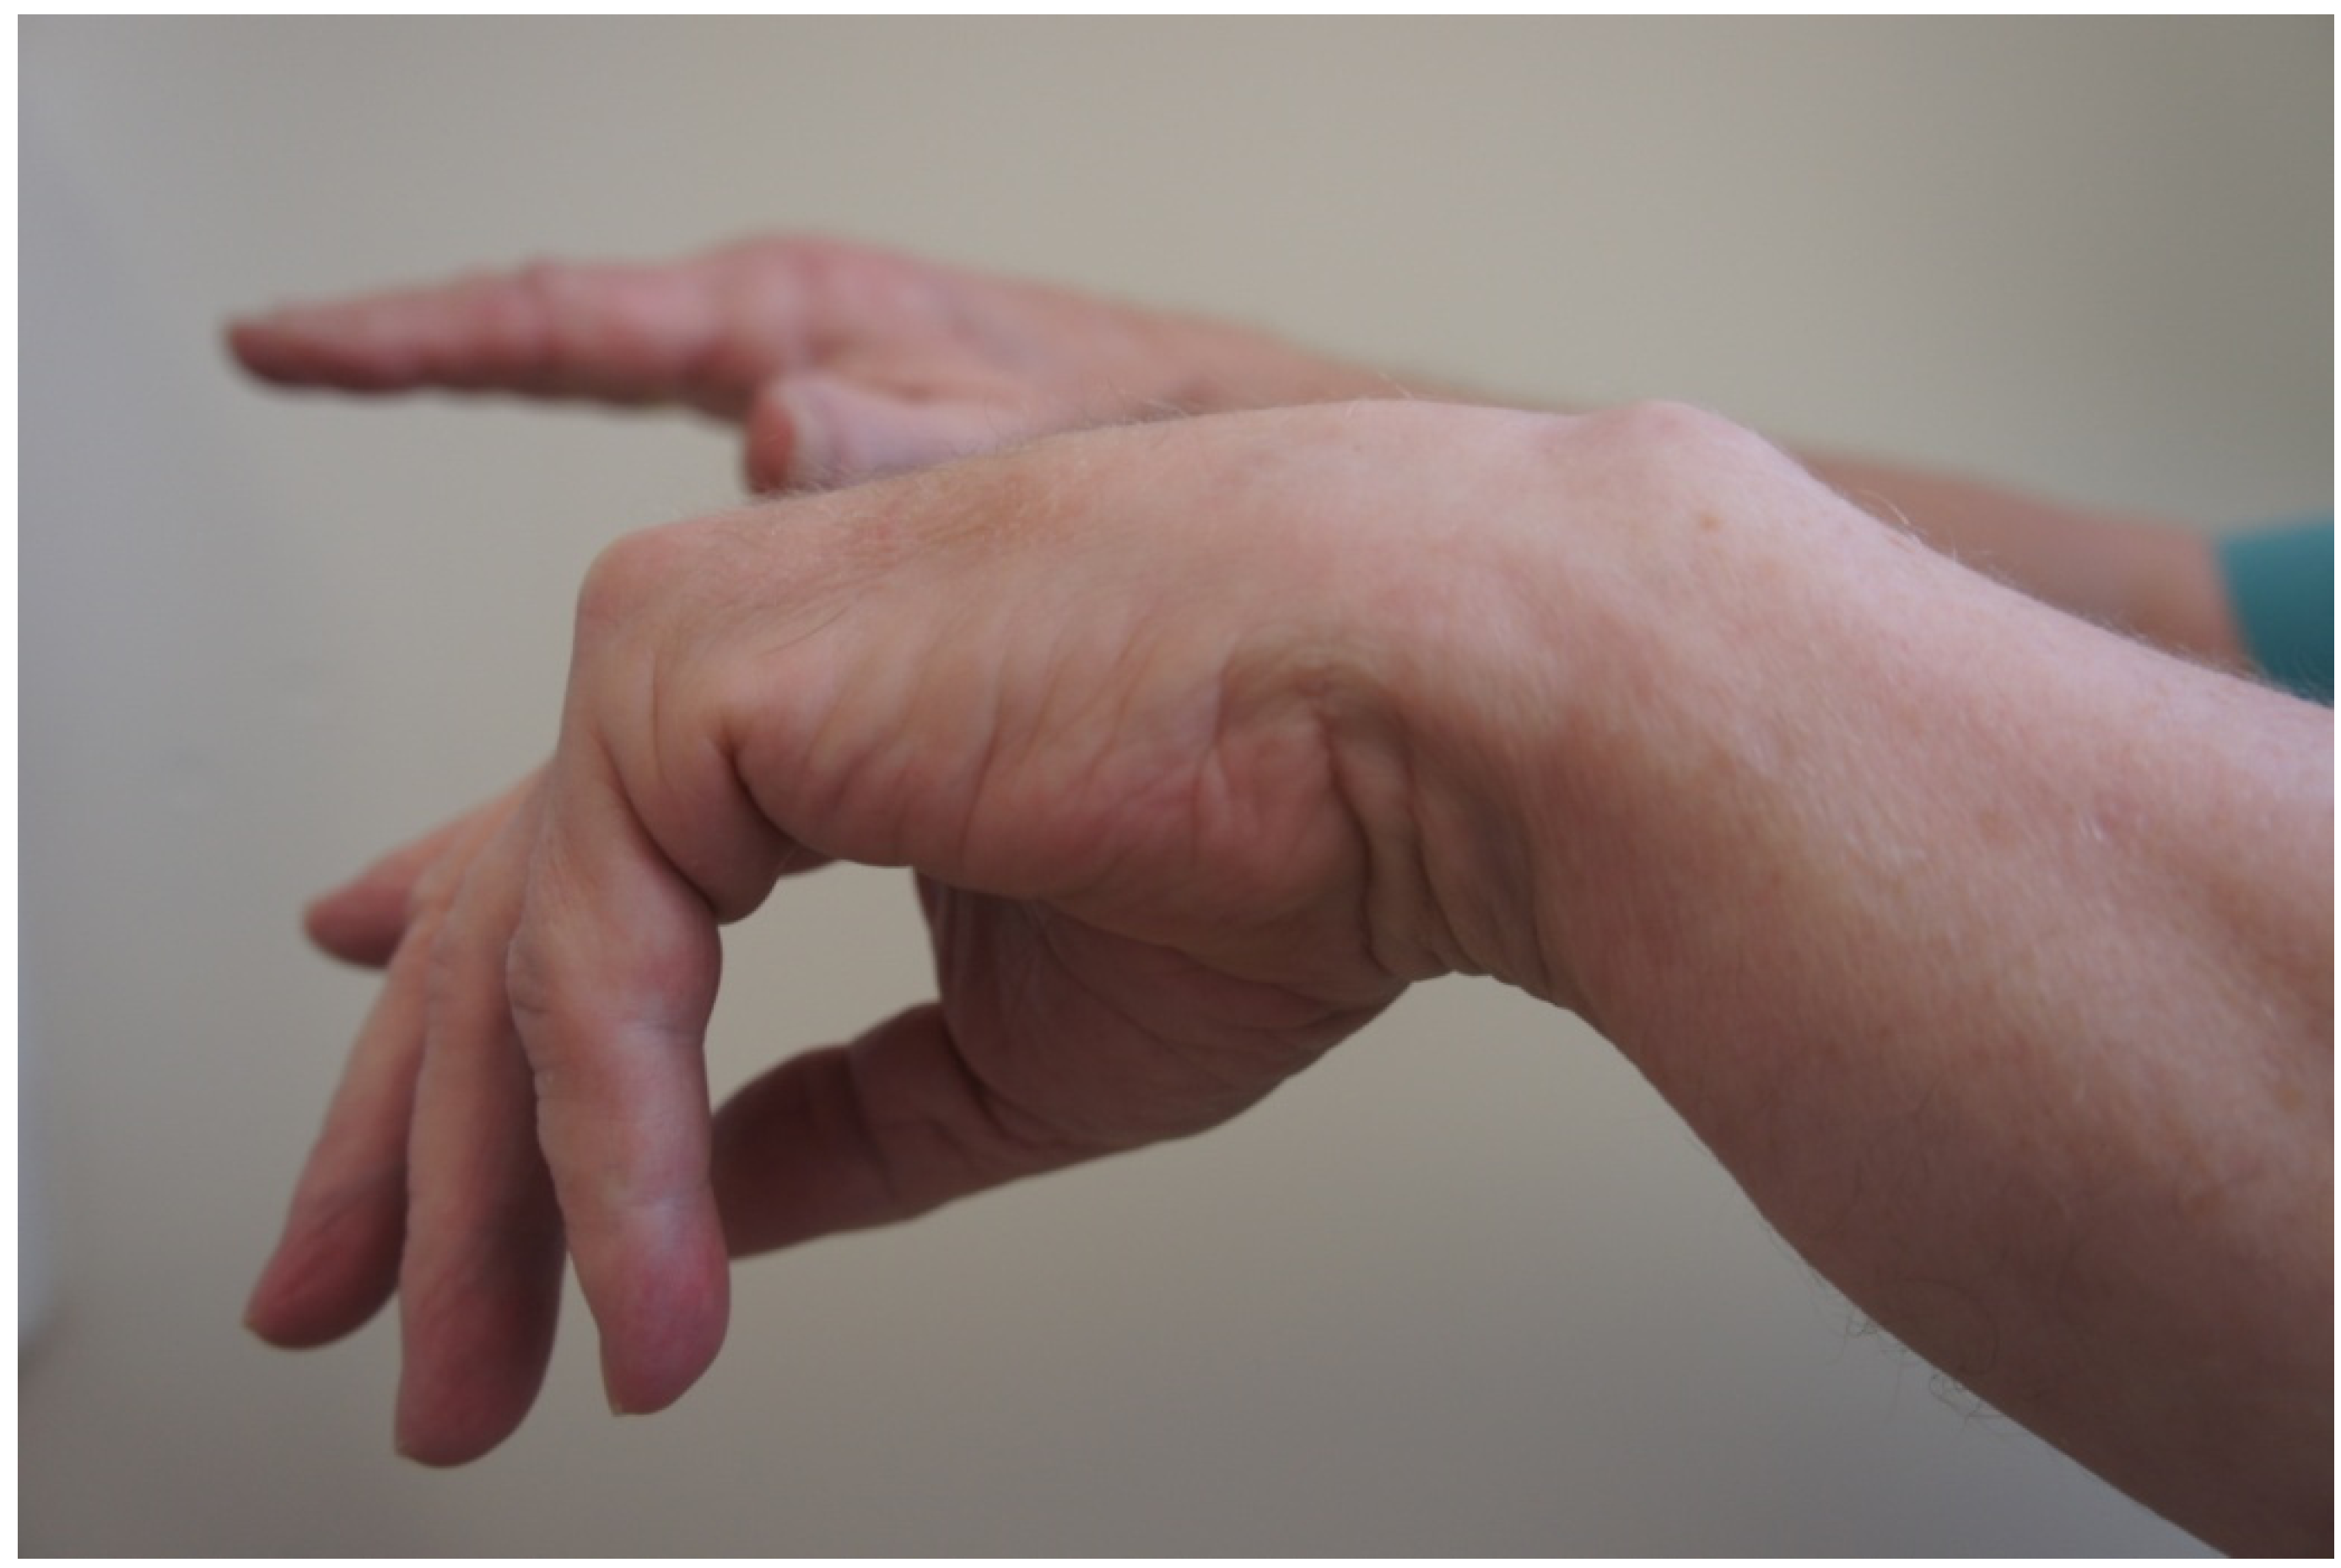 Figure 2: Posterior interosseous syndrome in a male patient with inability to fully extend the fingers or thumb of the right hand. Note radial deviation of wrist.